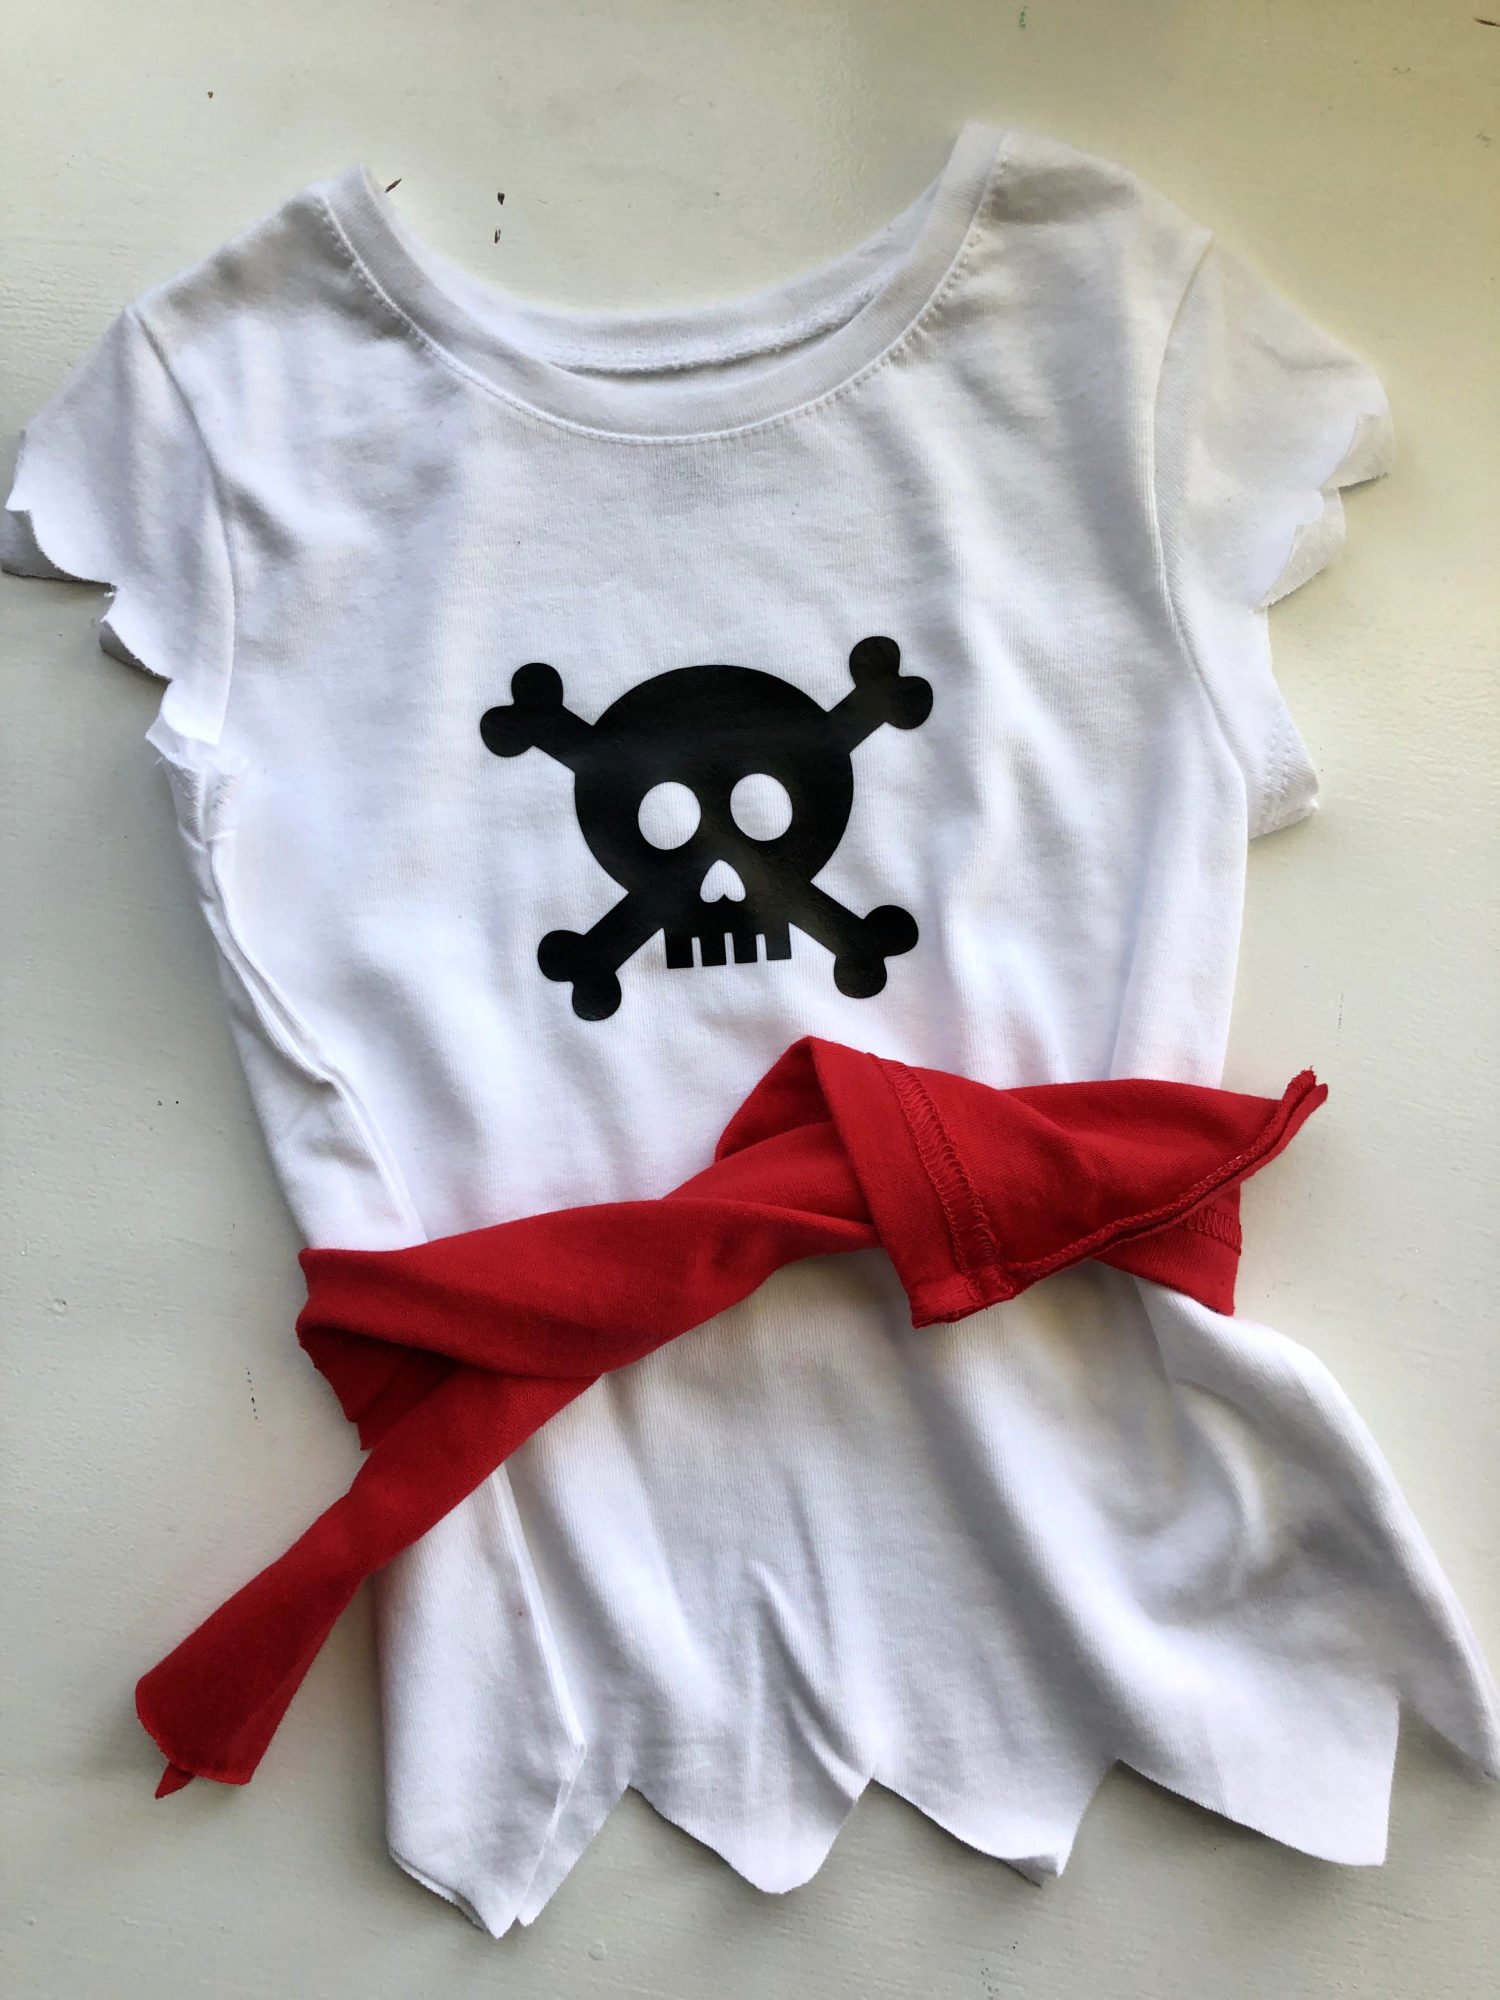 white shirt with black pirate skull and red belt. 